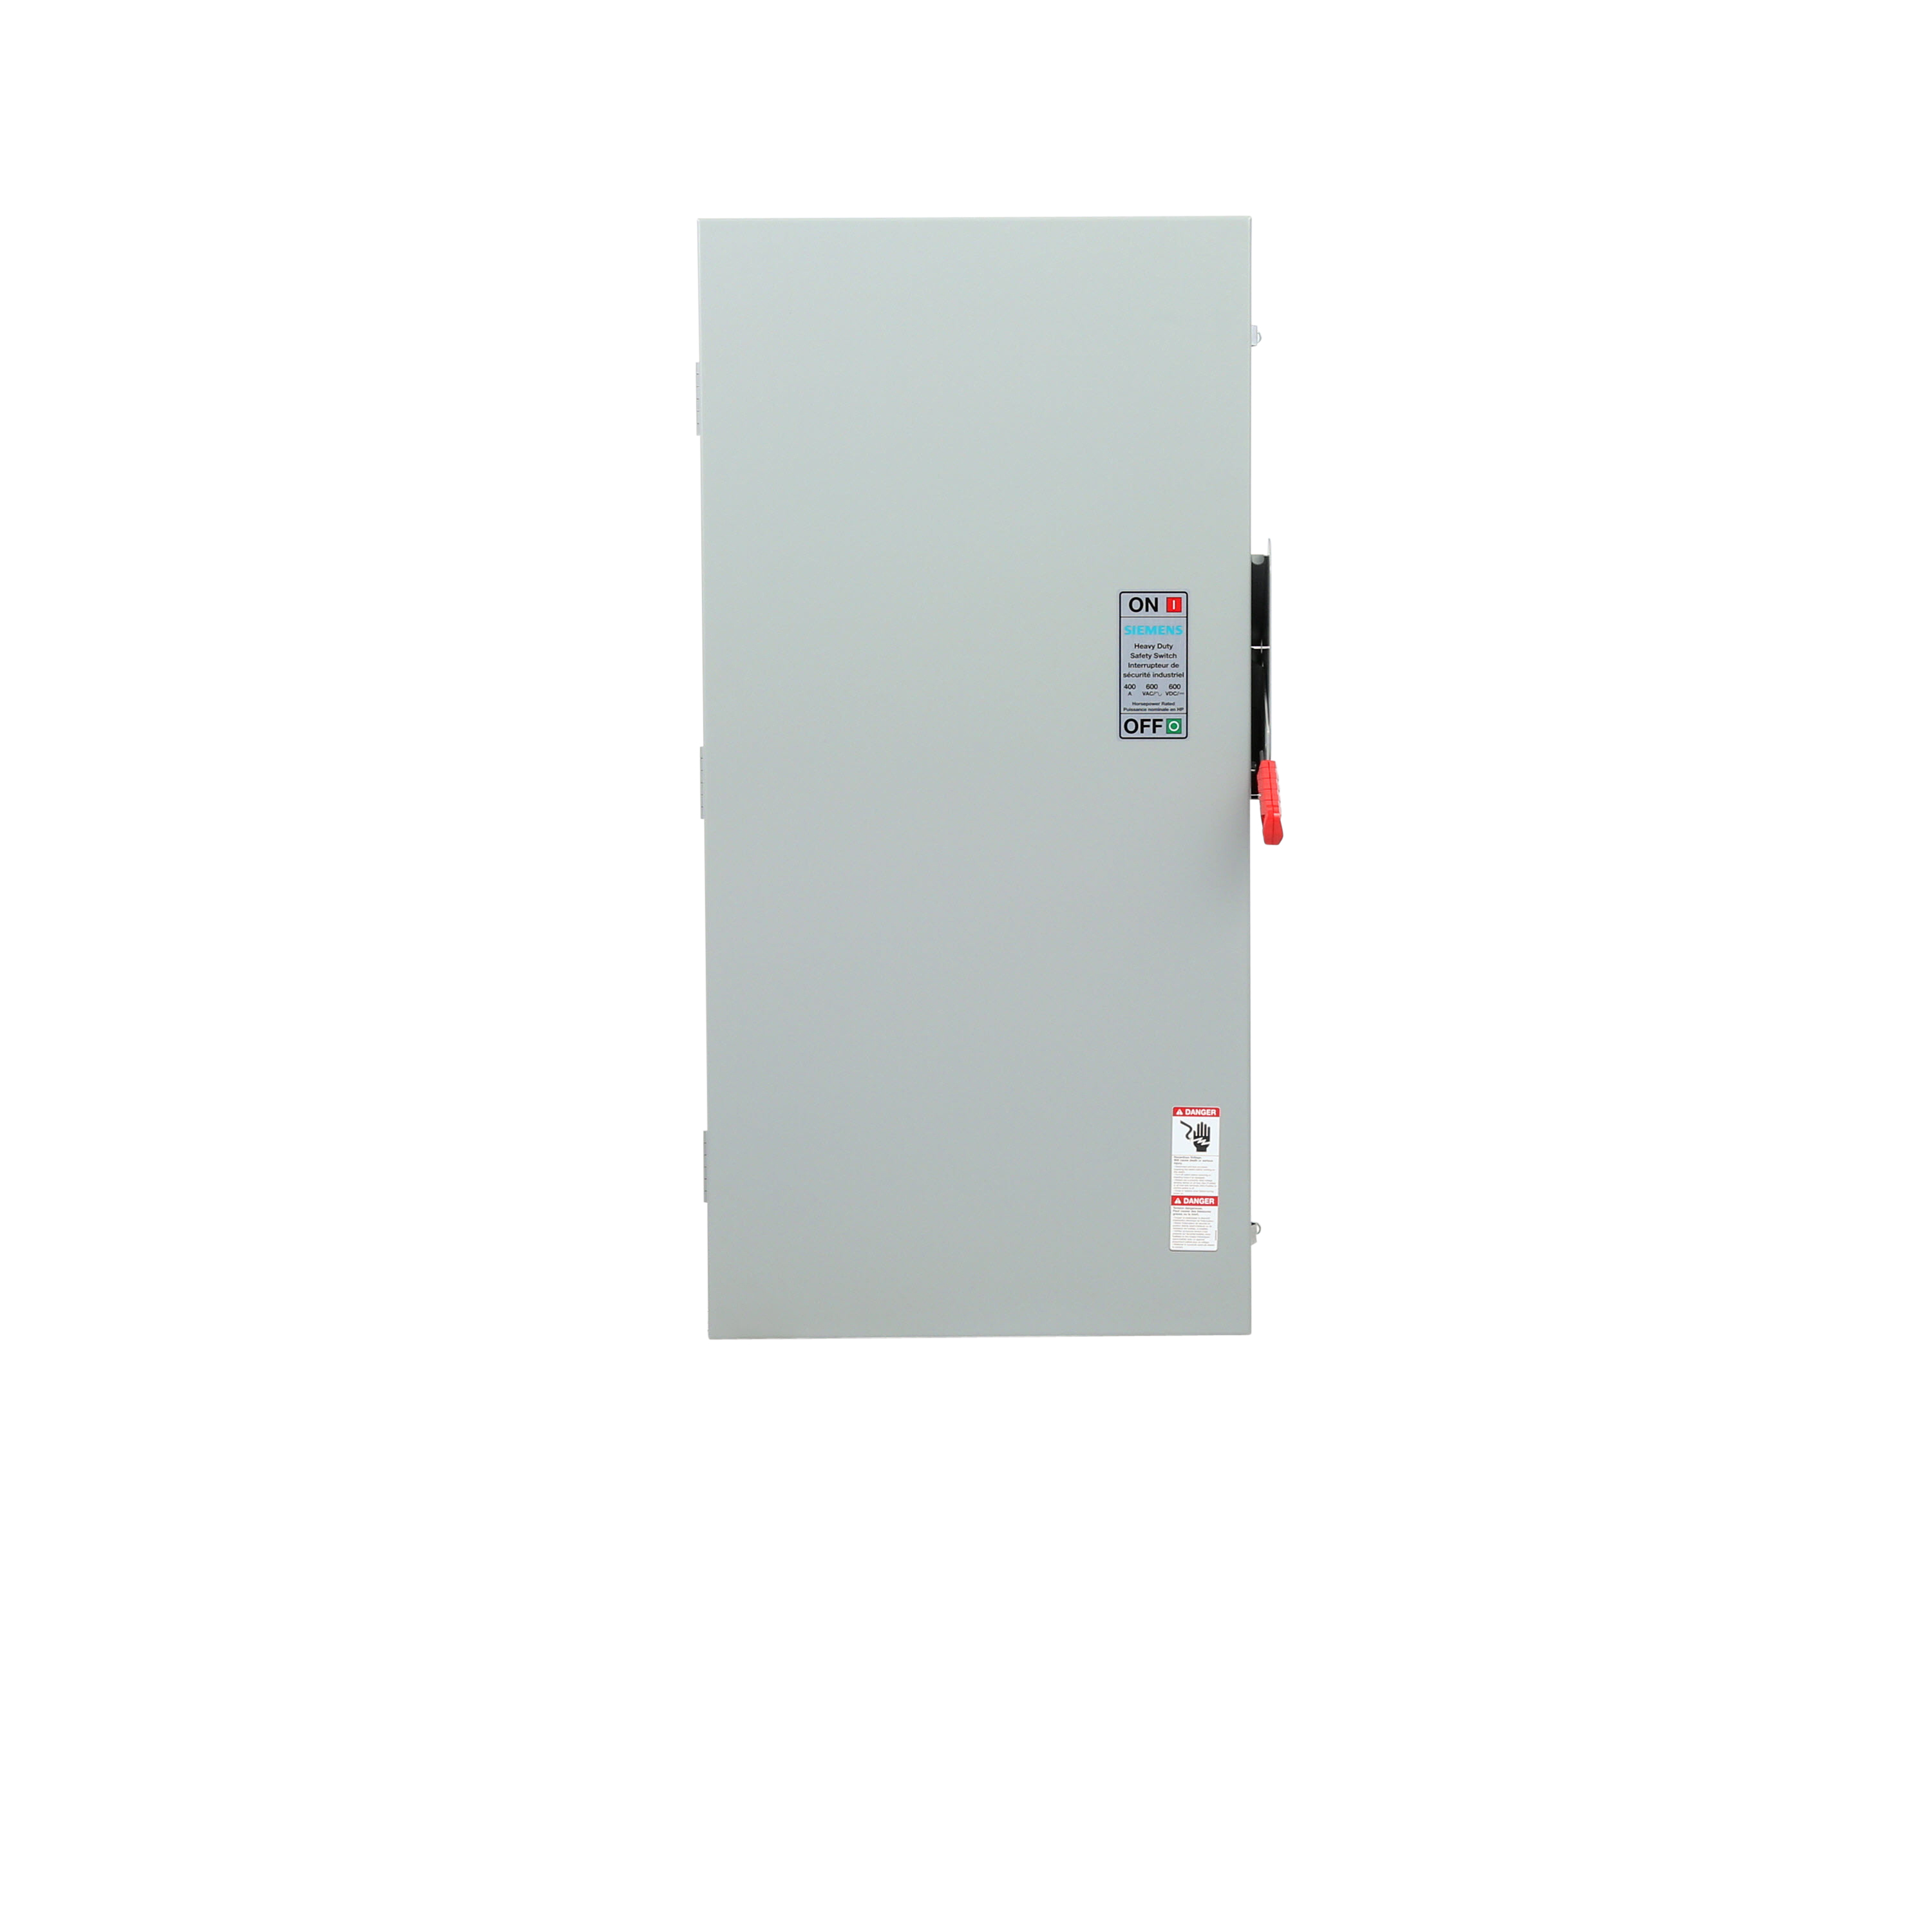 Siemens Low Voltage Circuit Protection Heavy Duty Safety Switch. 3-Pole 3-Fuse Fused in a type 1 enclosure (indoor). Rated 600VAC (400A).